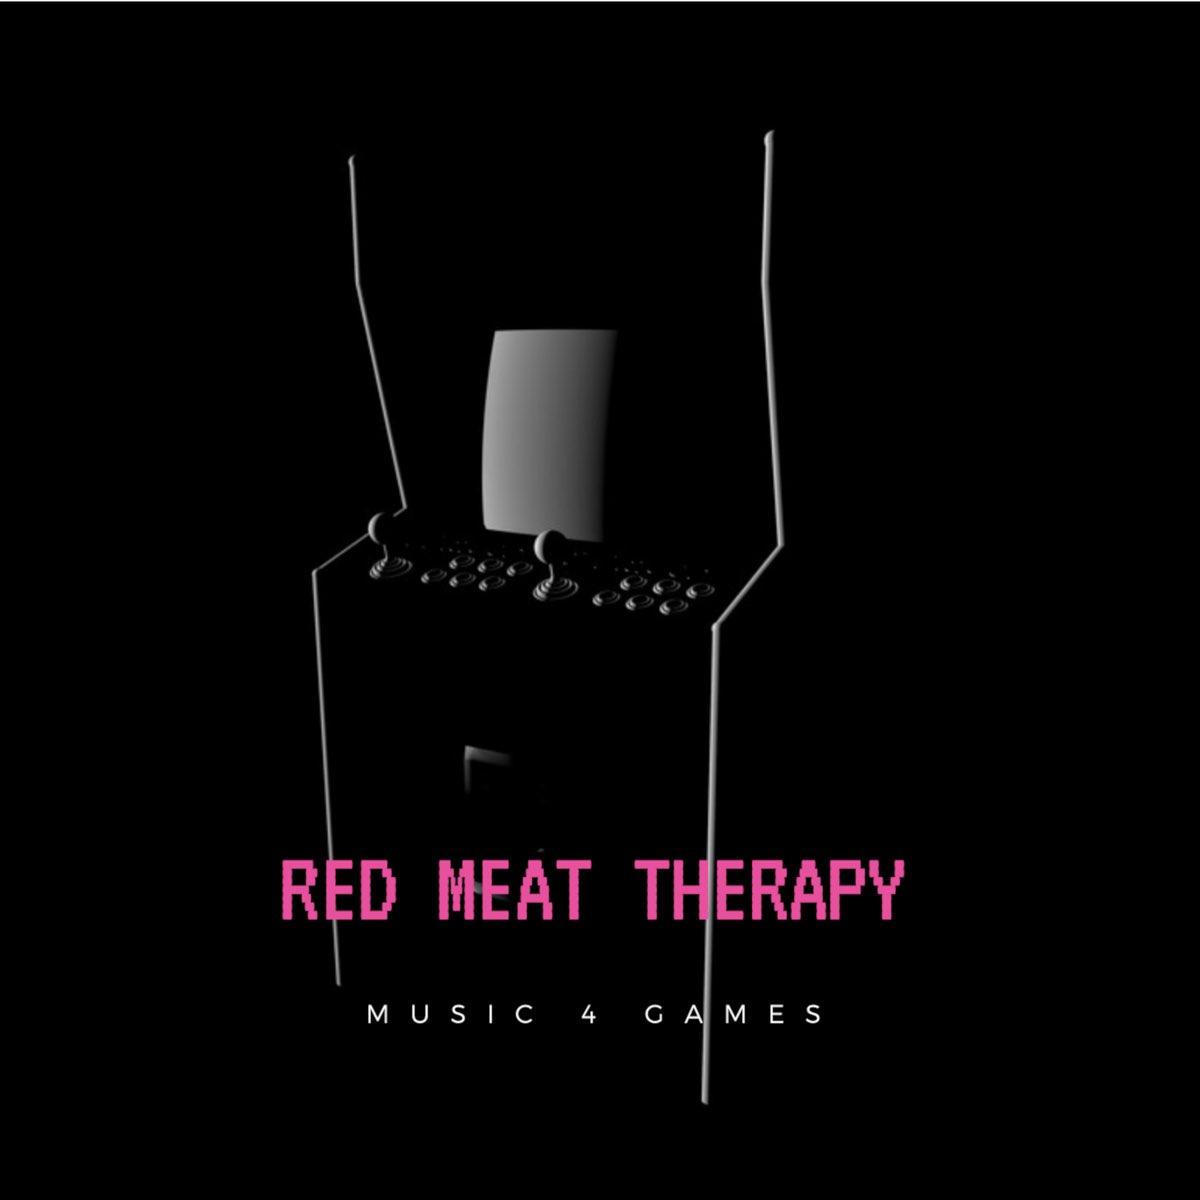 Music 4 Games - EP by Red Meat Therapy on Apple Music